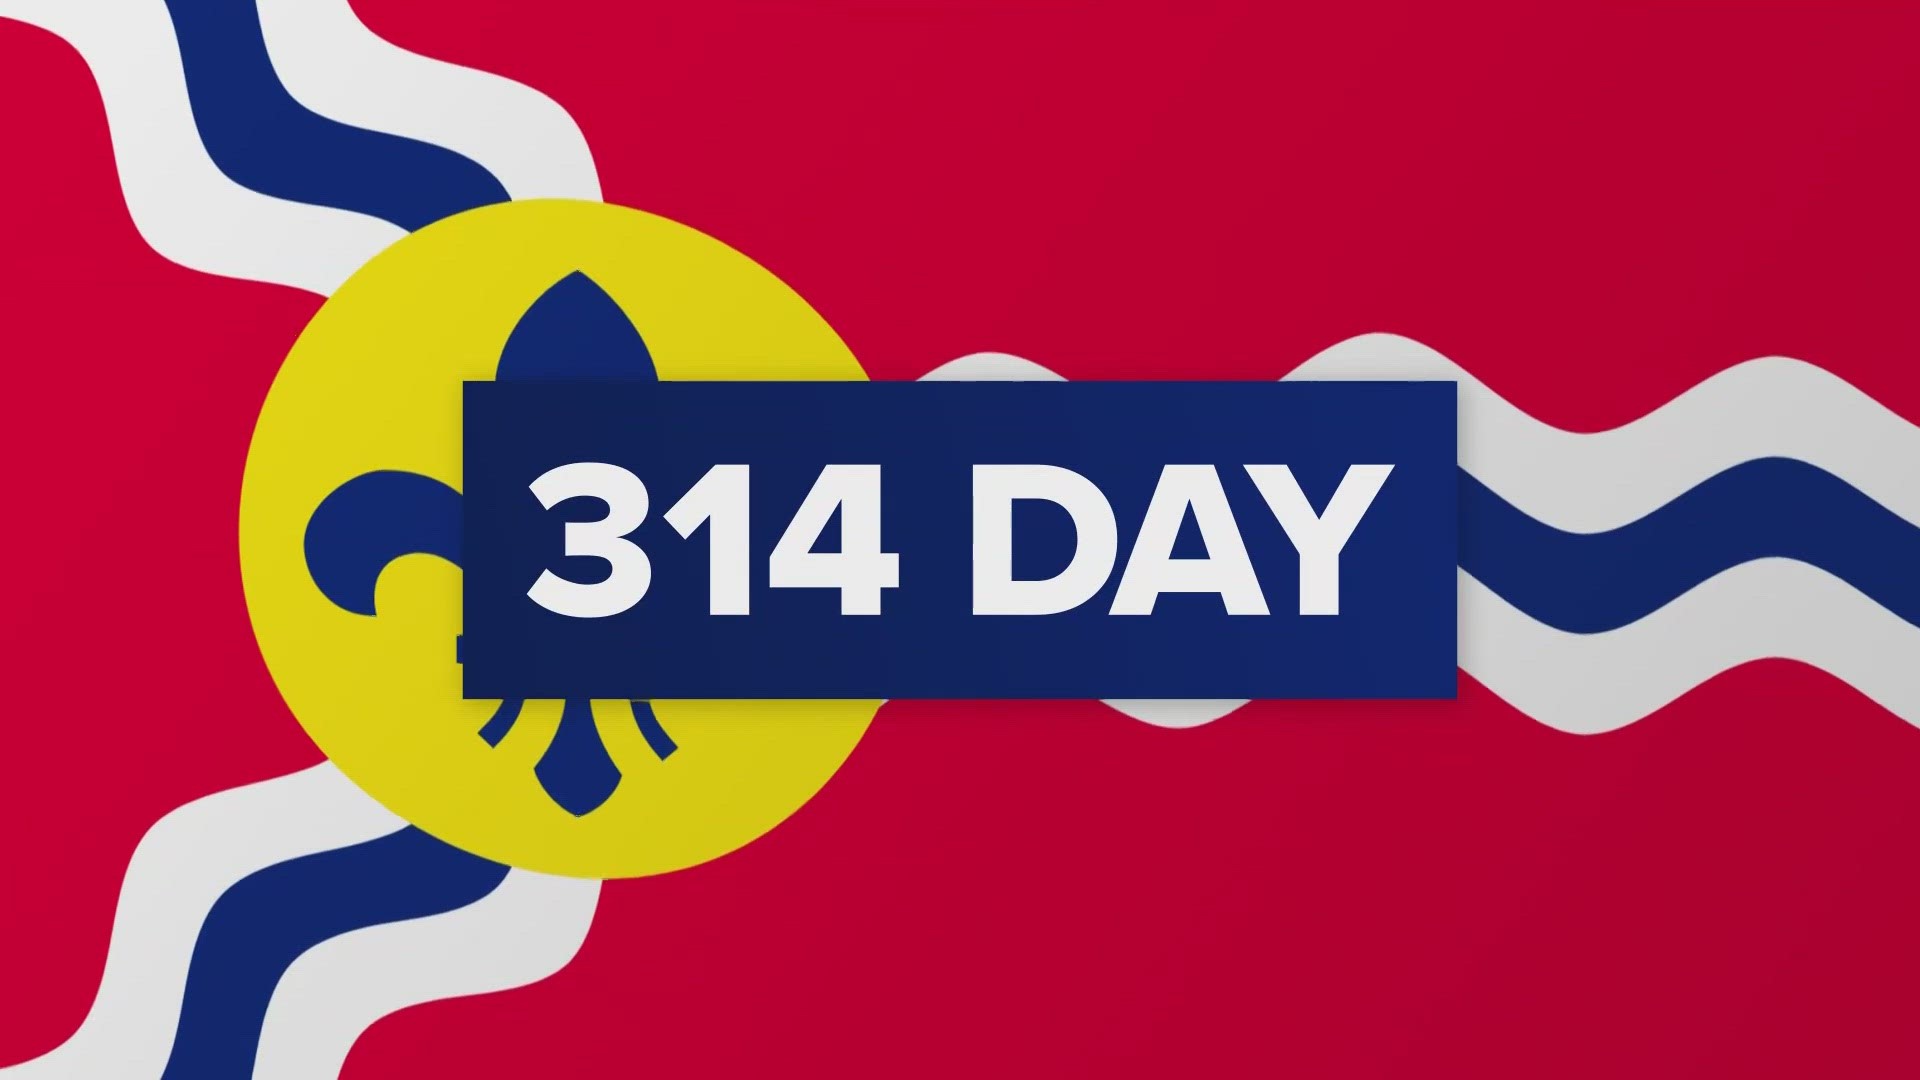 Businesses and residents are celebrating 314 Day across St. Louis. Specials, ticket sales and more are happening throughout the day.